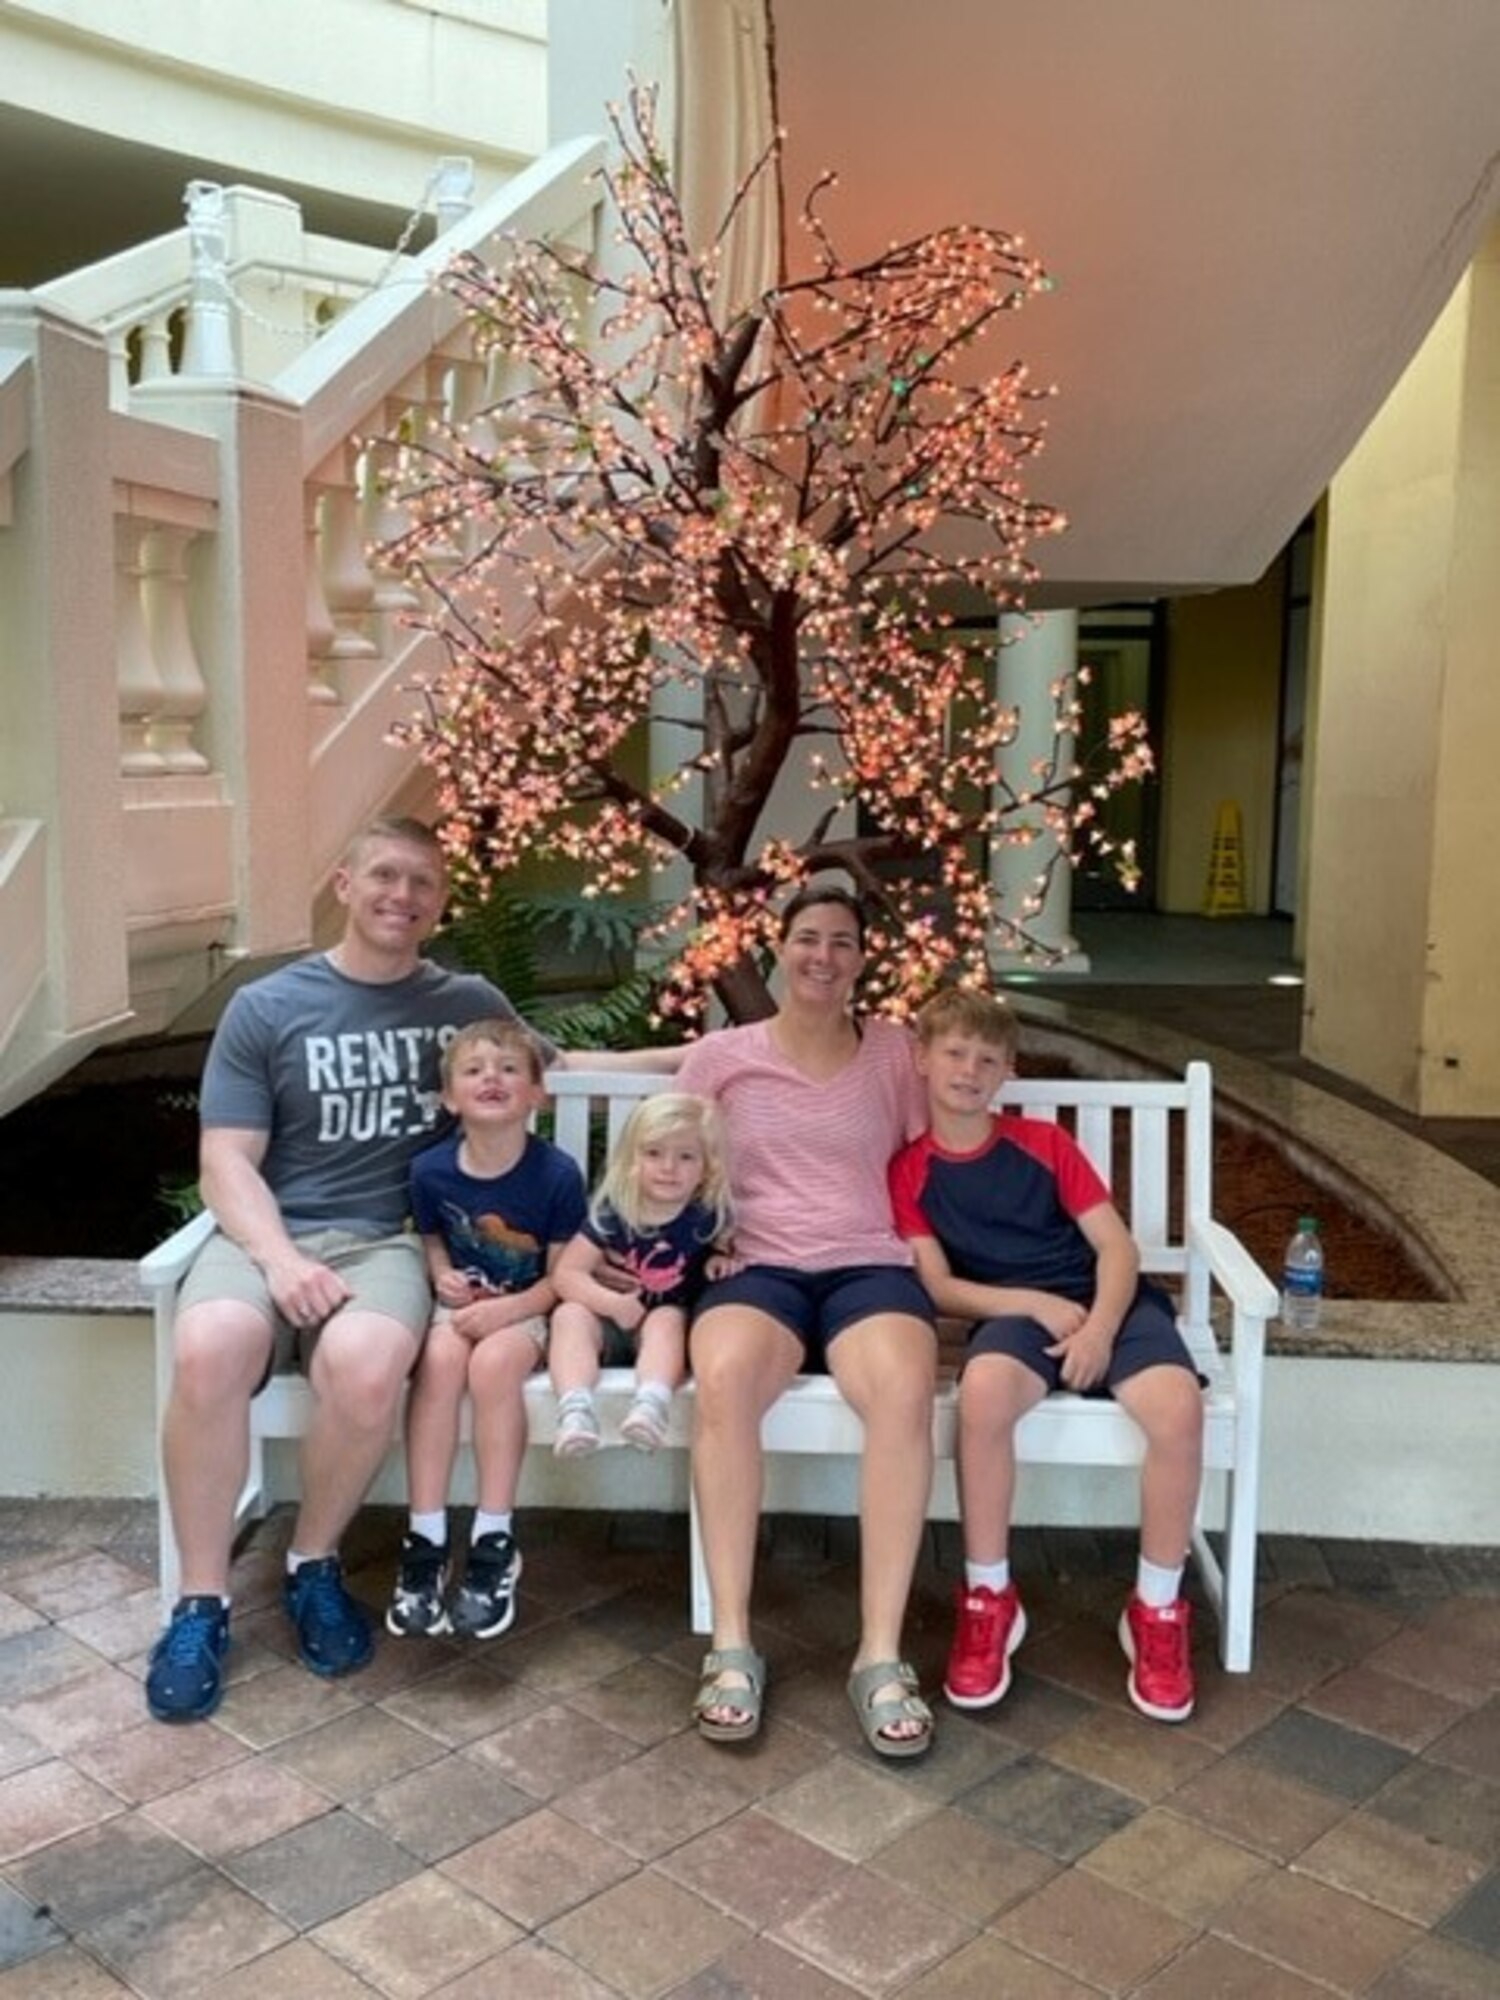 U.S. Air Force Lt. Col. Jennifer Johnson, 17th Healthcare Operations Squadron commander, sits with her husband Lt. Col. Jeremiah Johnson and their children: Mason, Isaac, and Maggie. In 2021, they spent time together as a family in Destin, Florida for Christmas and New Year’s. (Courtesy Photo)